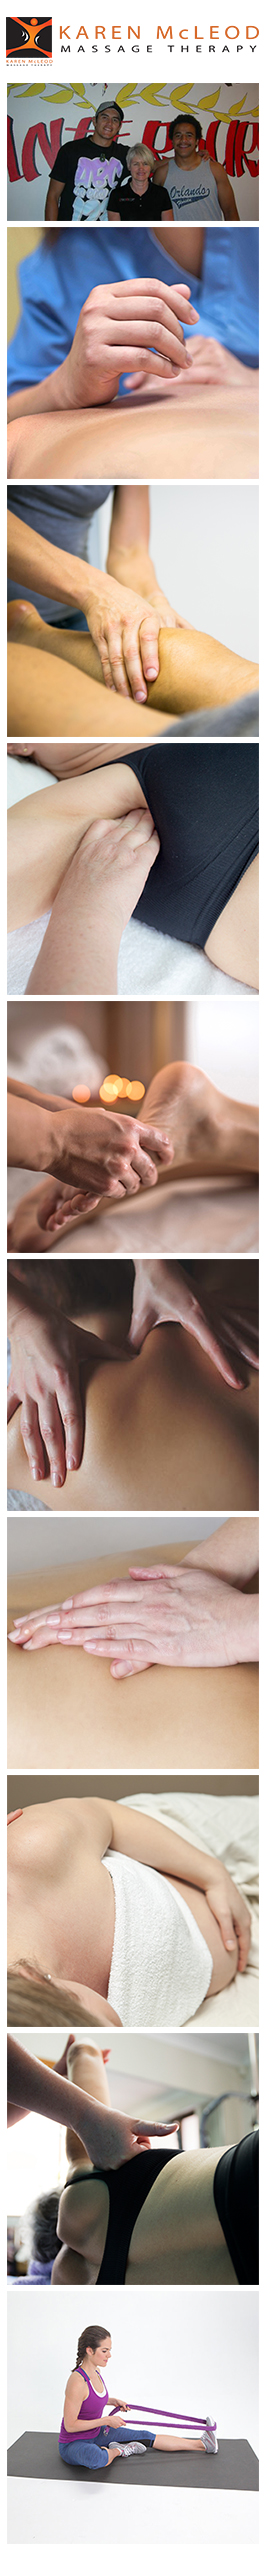 Profile picture for Karen McLeod Massage therapy